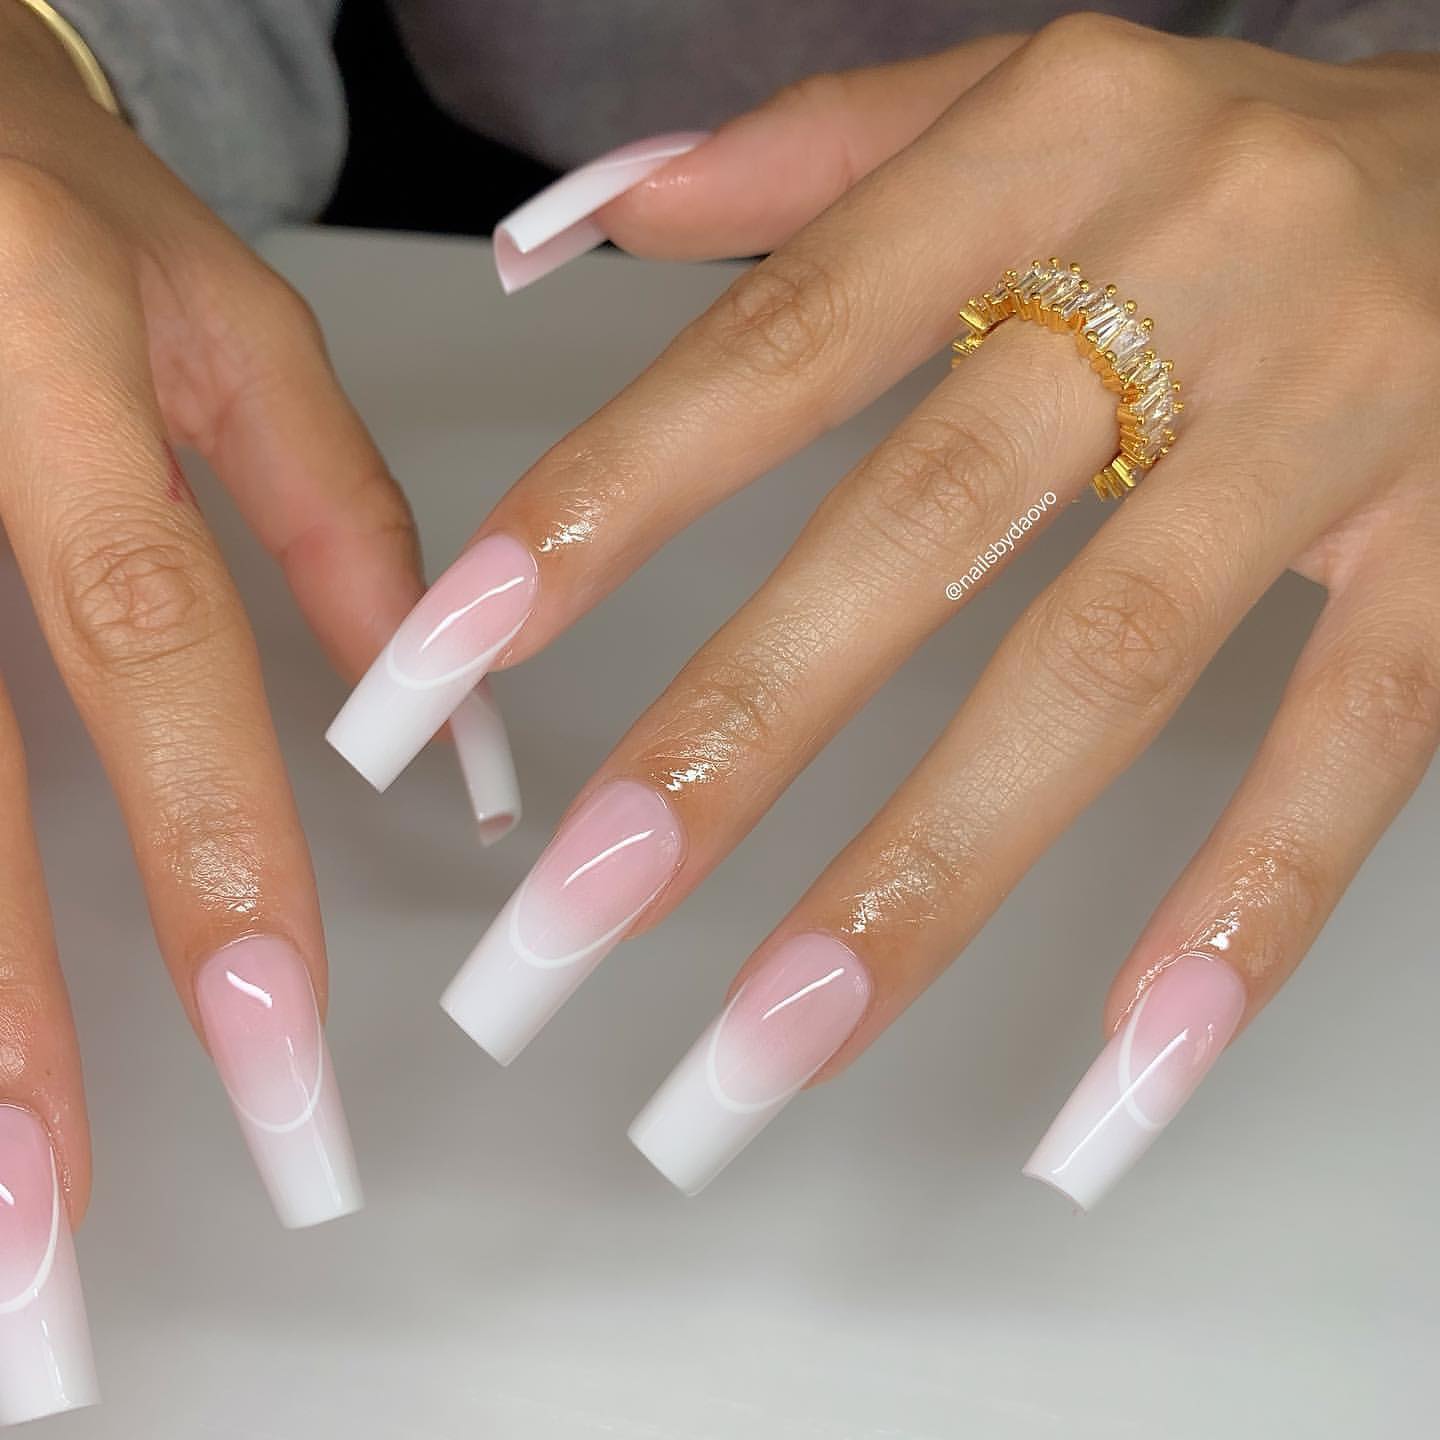 Have you ever seen such a perfect ombre nails? This nail design is absolutely flawless. With long square nails, it seems like ombre design is best suited. Let's go and get these as soon as possible.